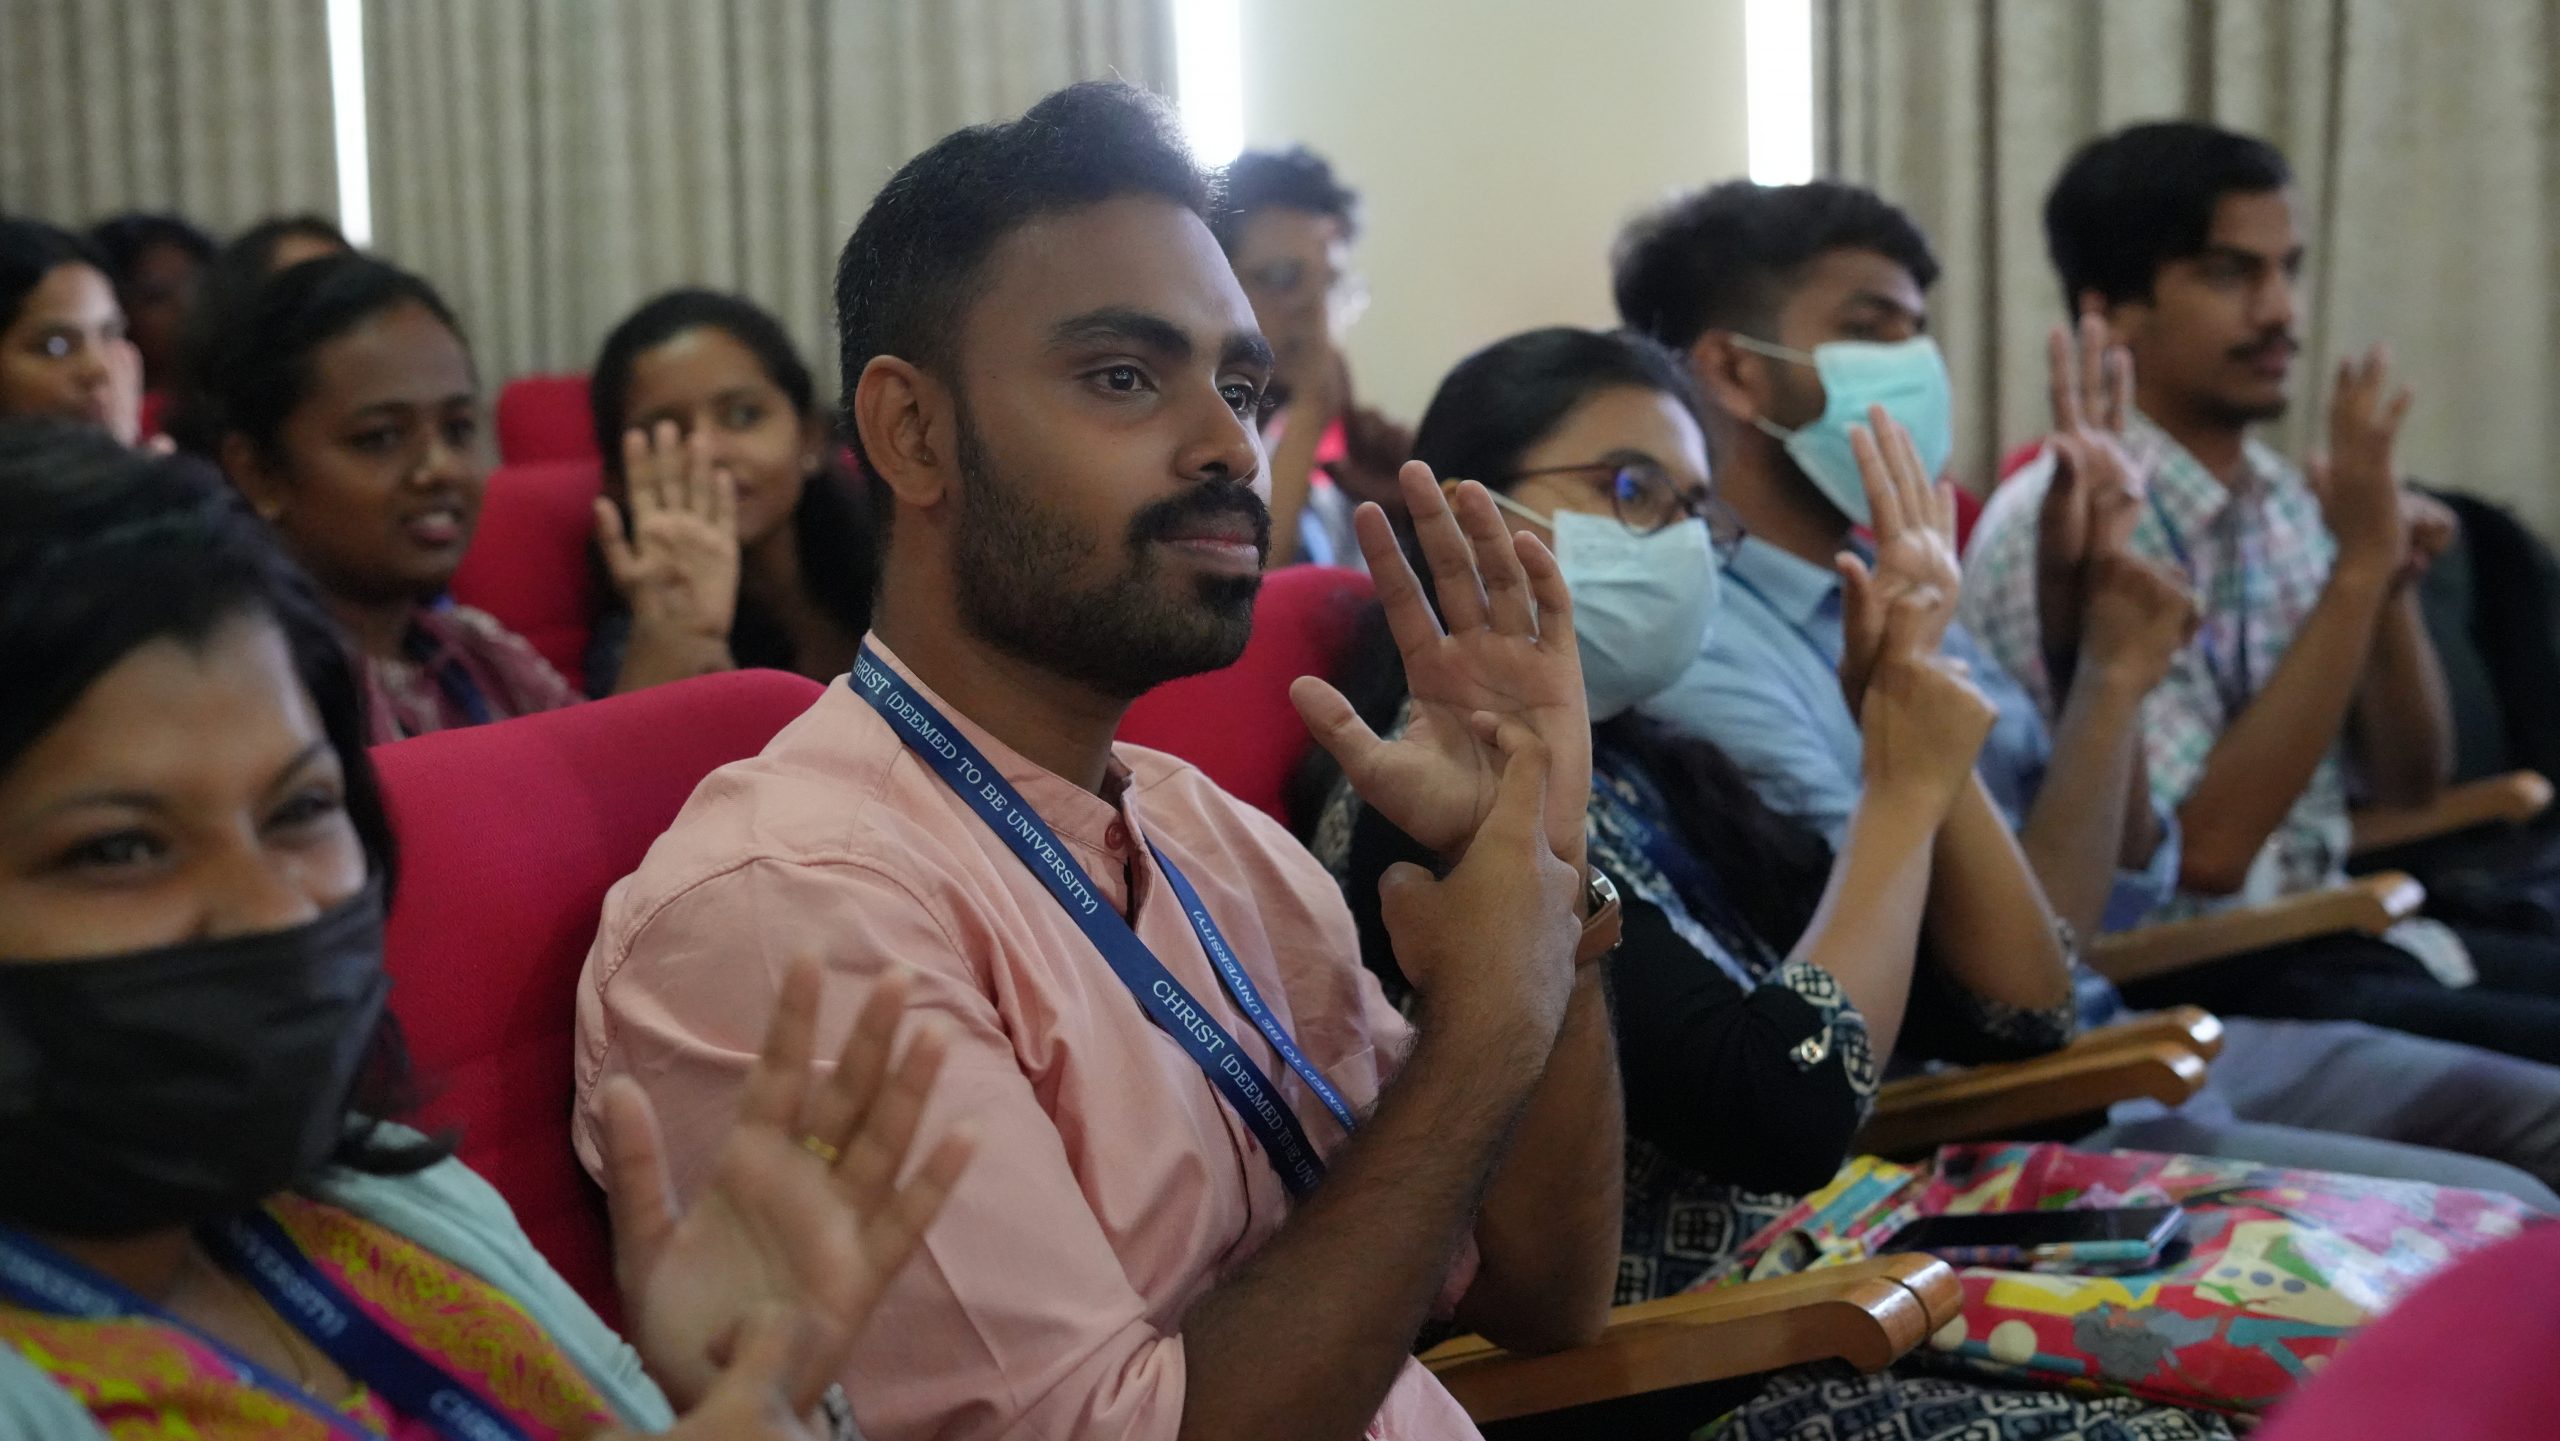 Moments from the sensitization session where students are learning Indian Sign Language